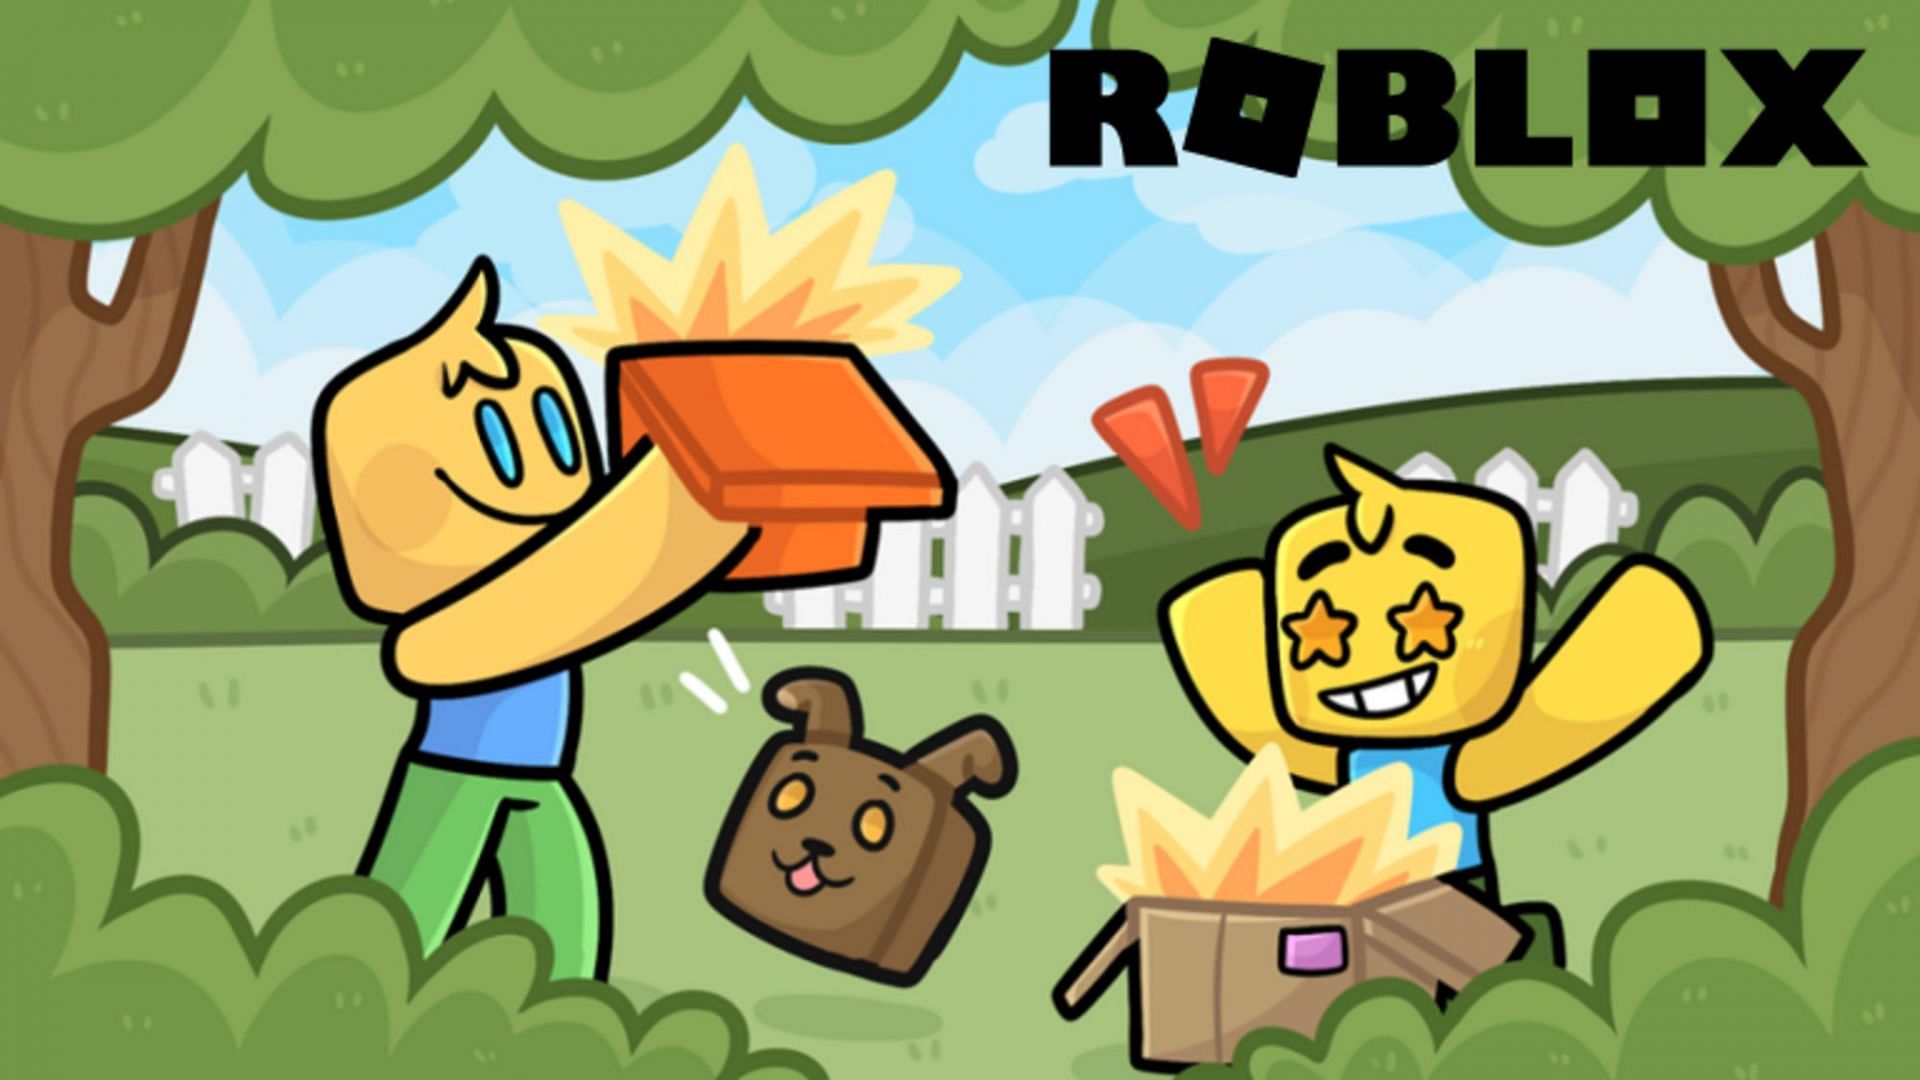 Roblox Unboxing Simulator codes to redeem free coins and gems (Image via Roblox)